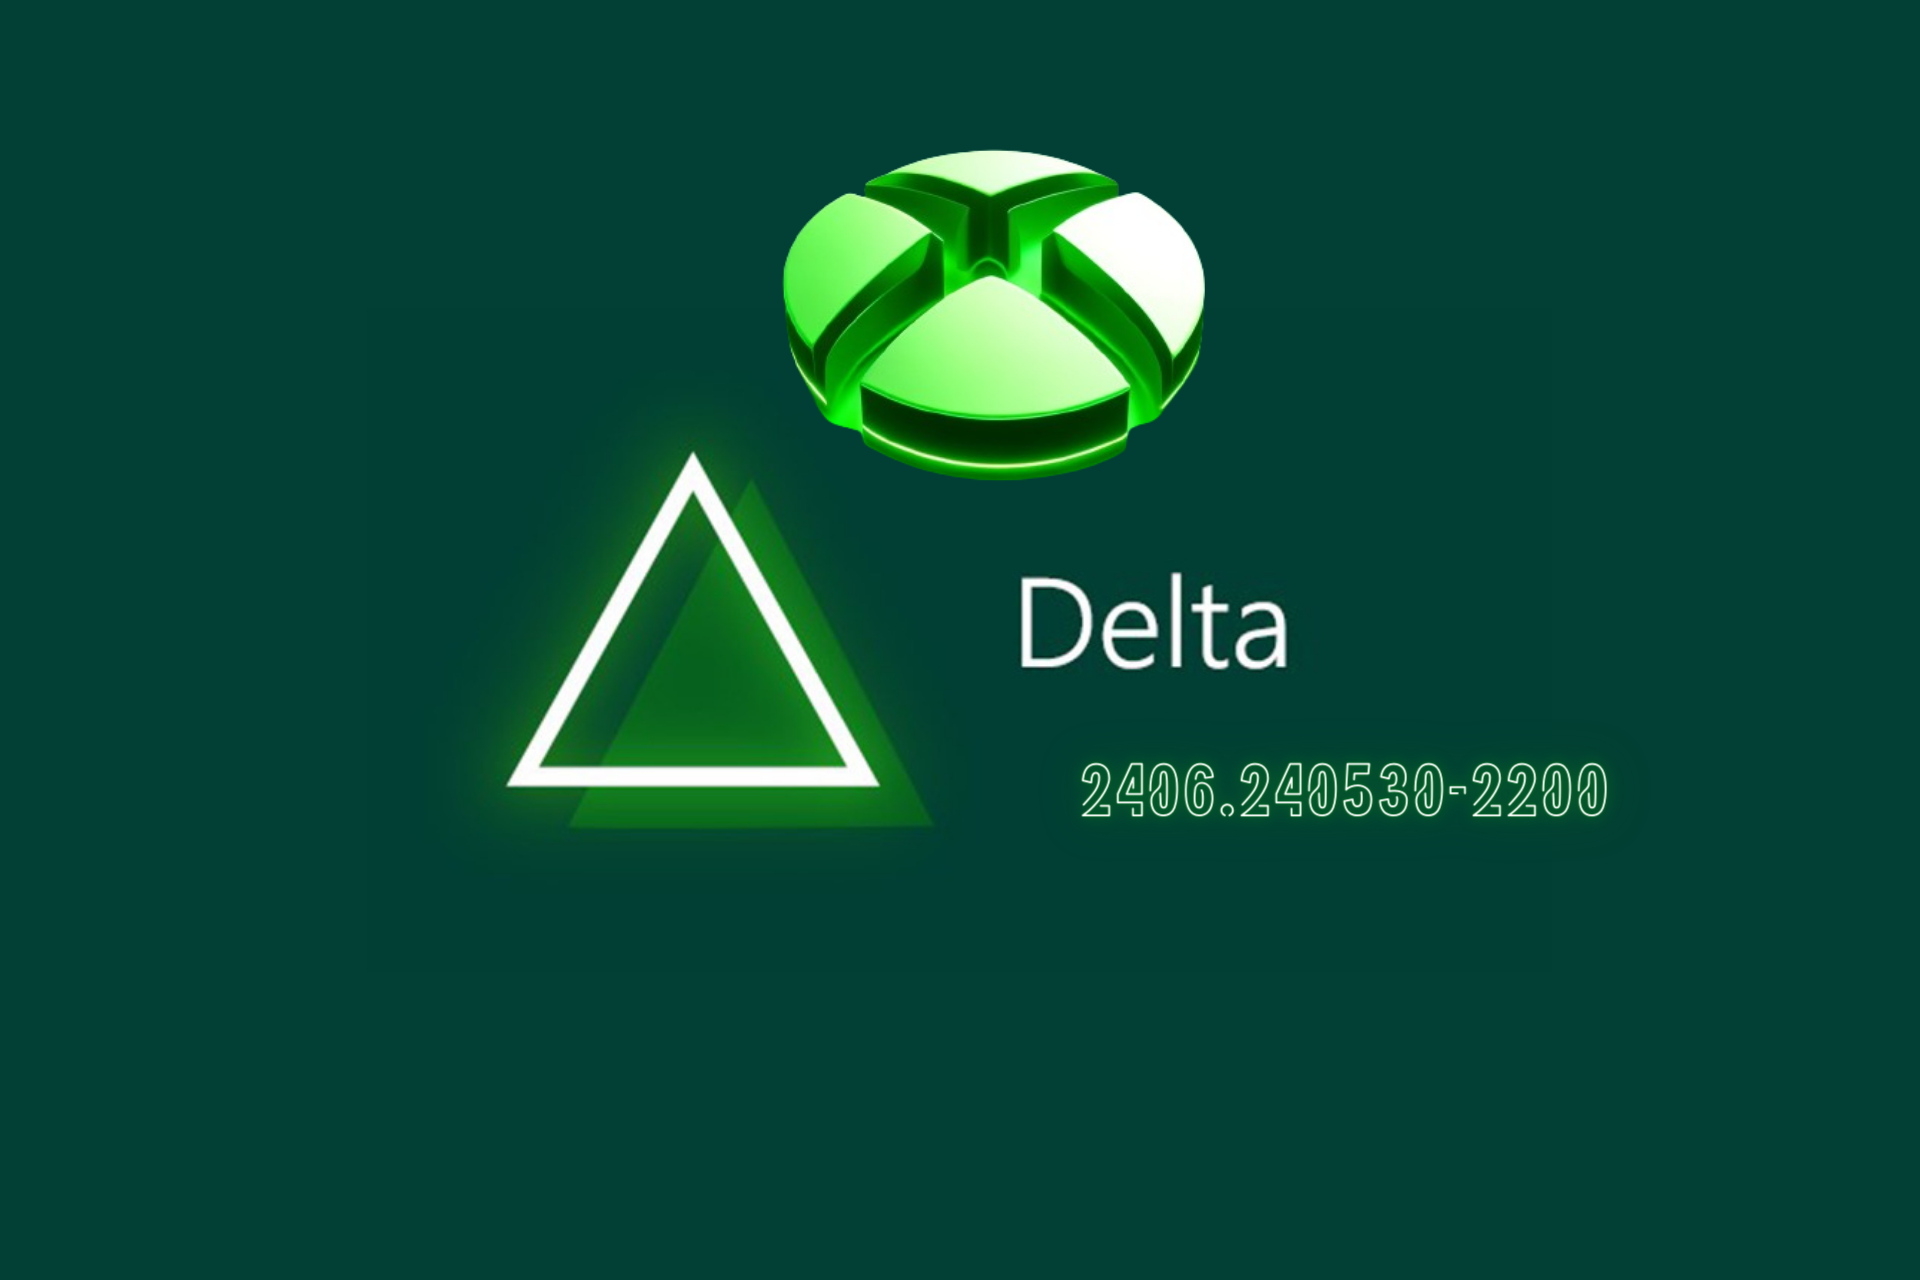 A new Xbox Update Preview to the Delta ring brings fixes for performance issues